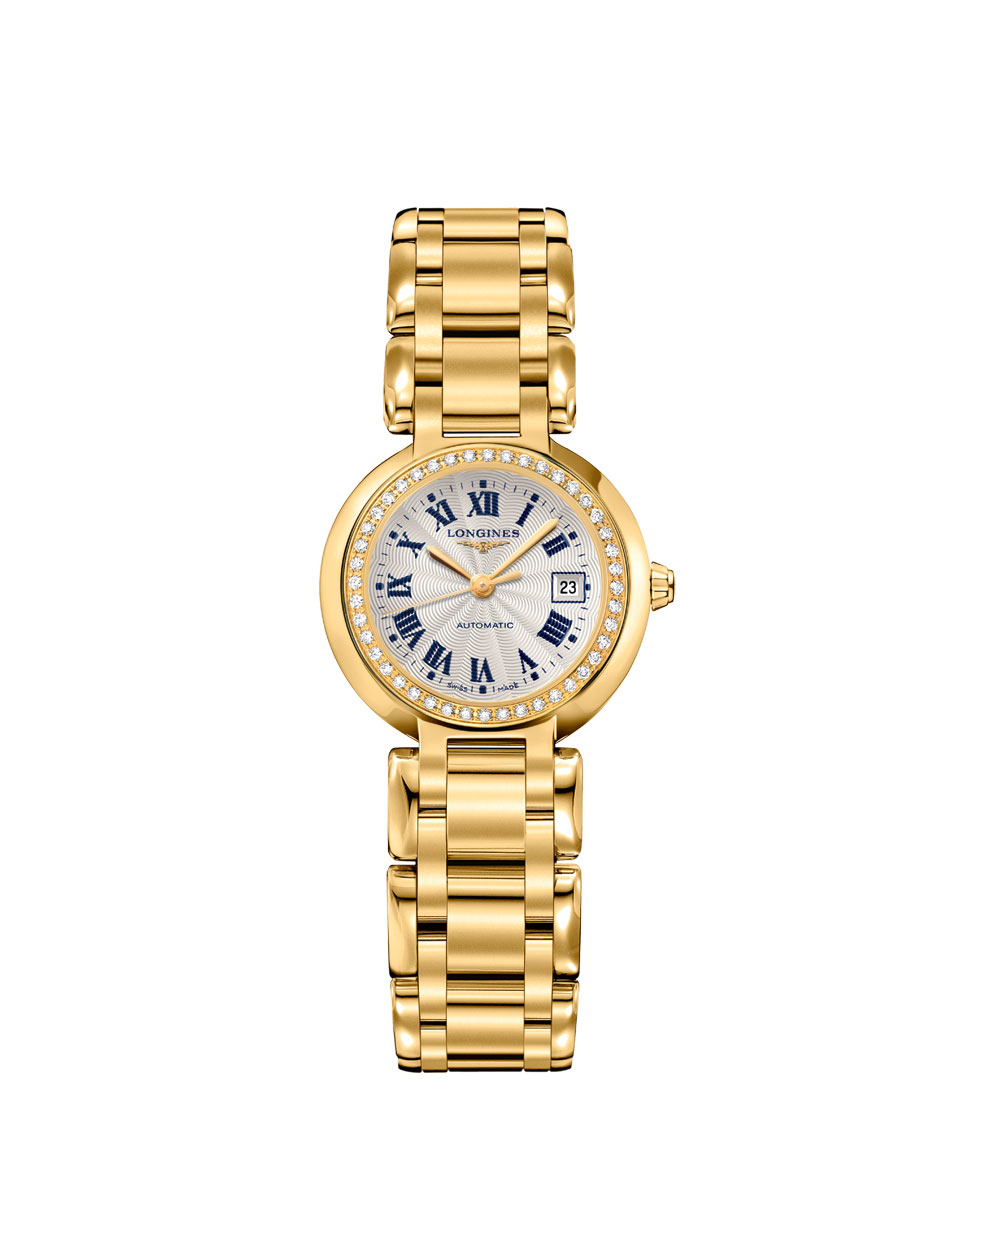 Longines watch, $21,722, from Partridge Jewellers